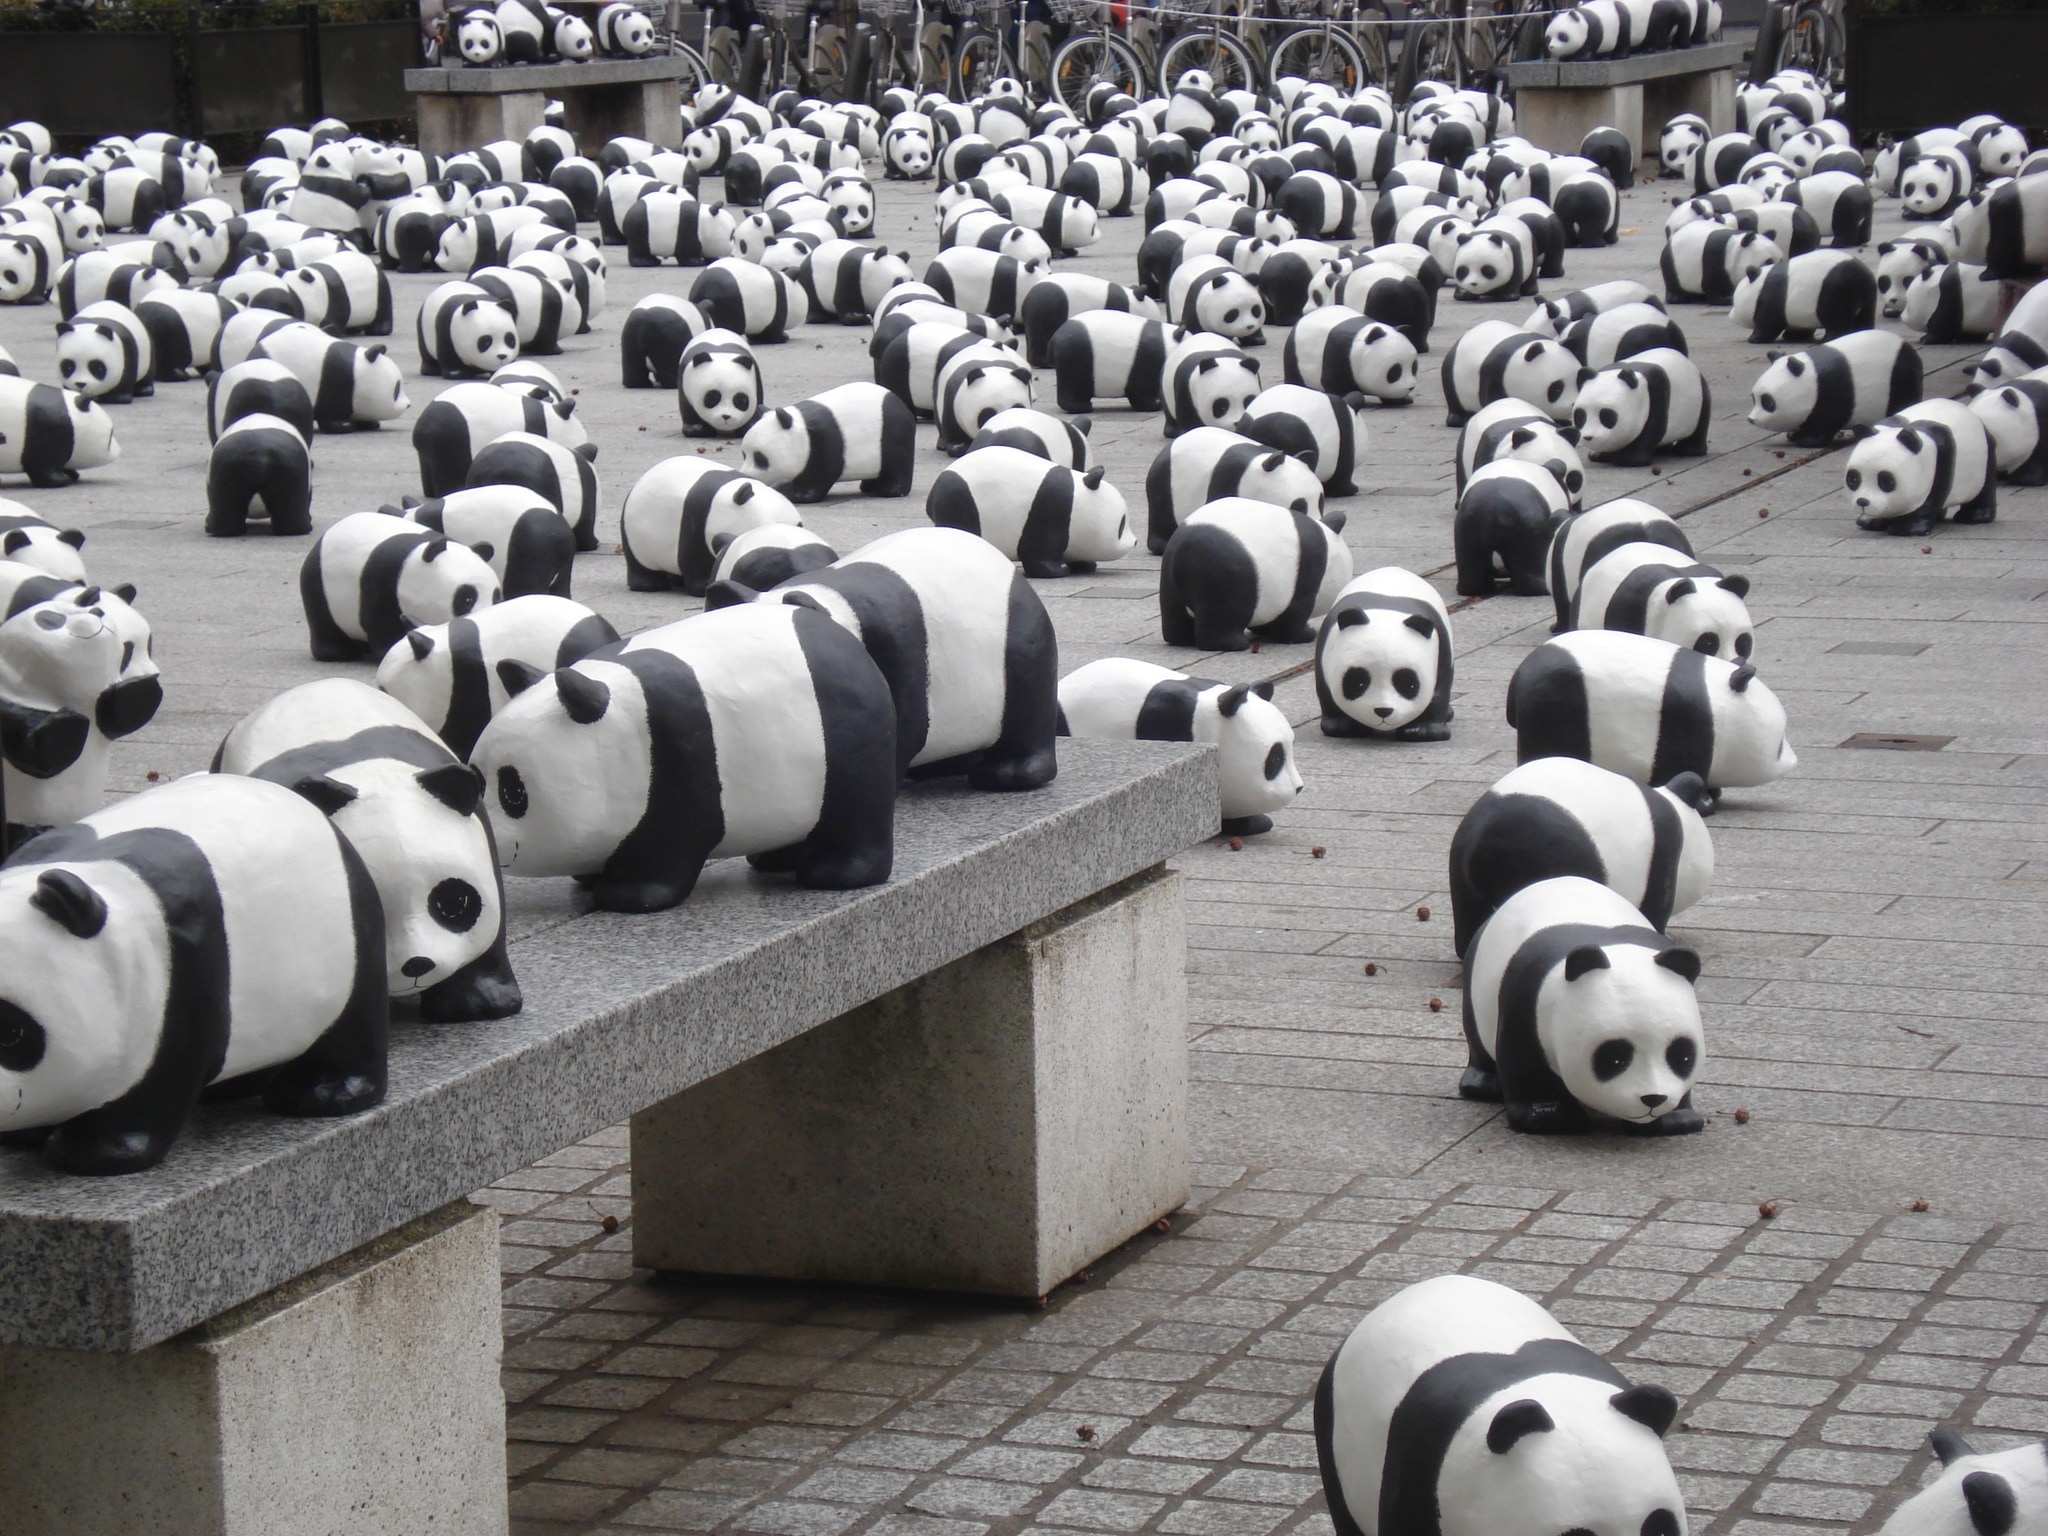 Exhibition, Pandas, Miniature, Bears, in a row, no people